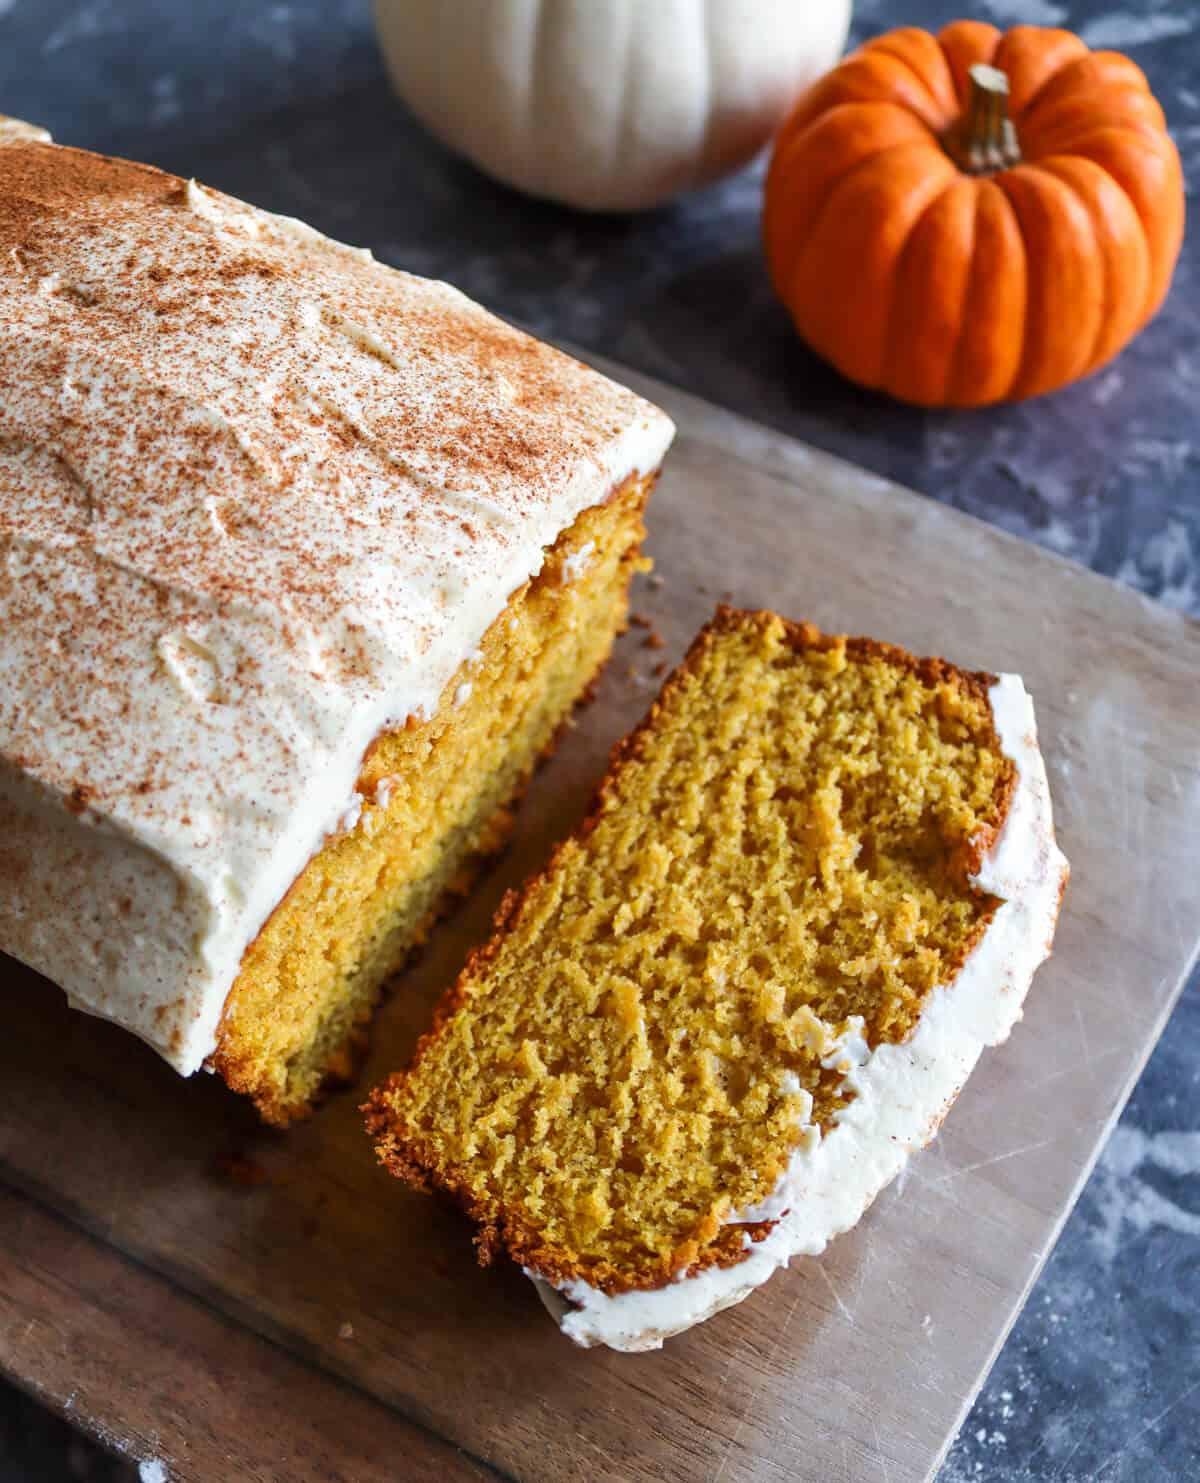 A spiced pumpkin yogurt cake covered in mascarpone cream cheese frosting and dusted with cinnamon, on a bread board surrounded by ornamental pumpkins.